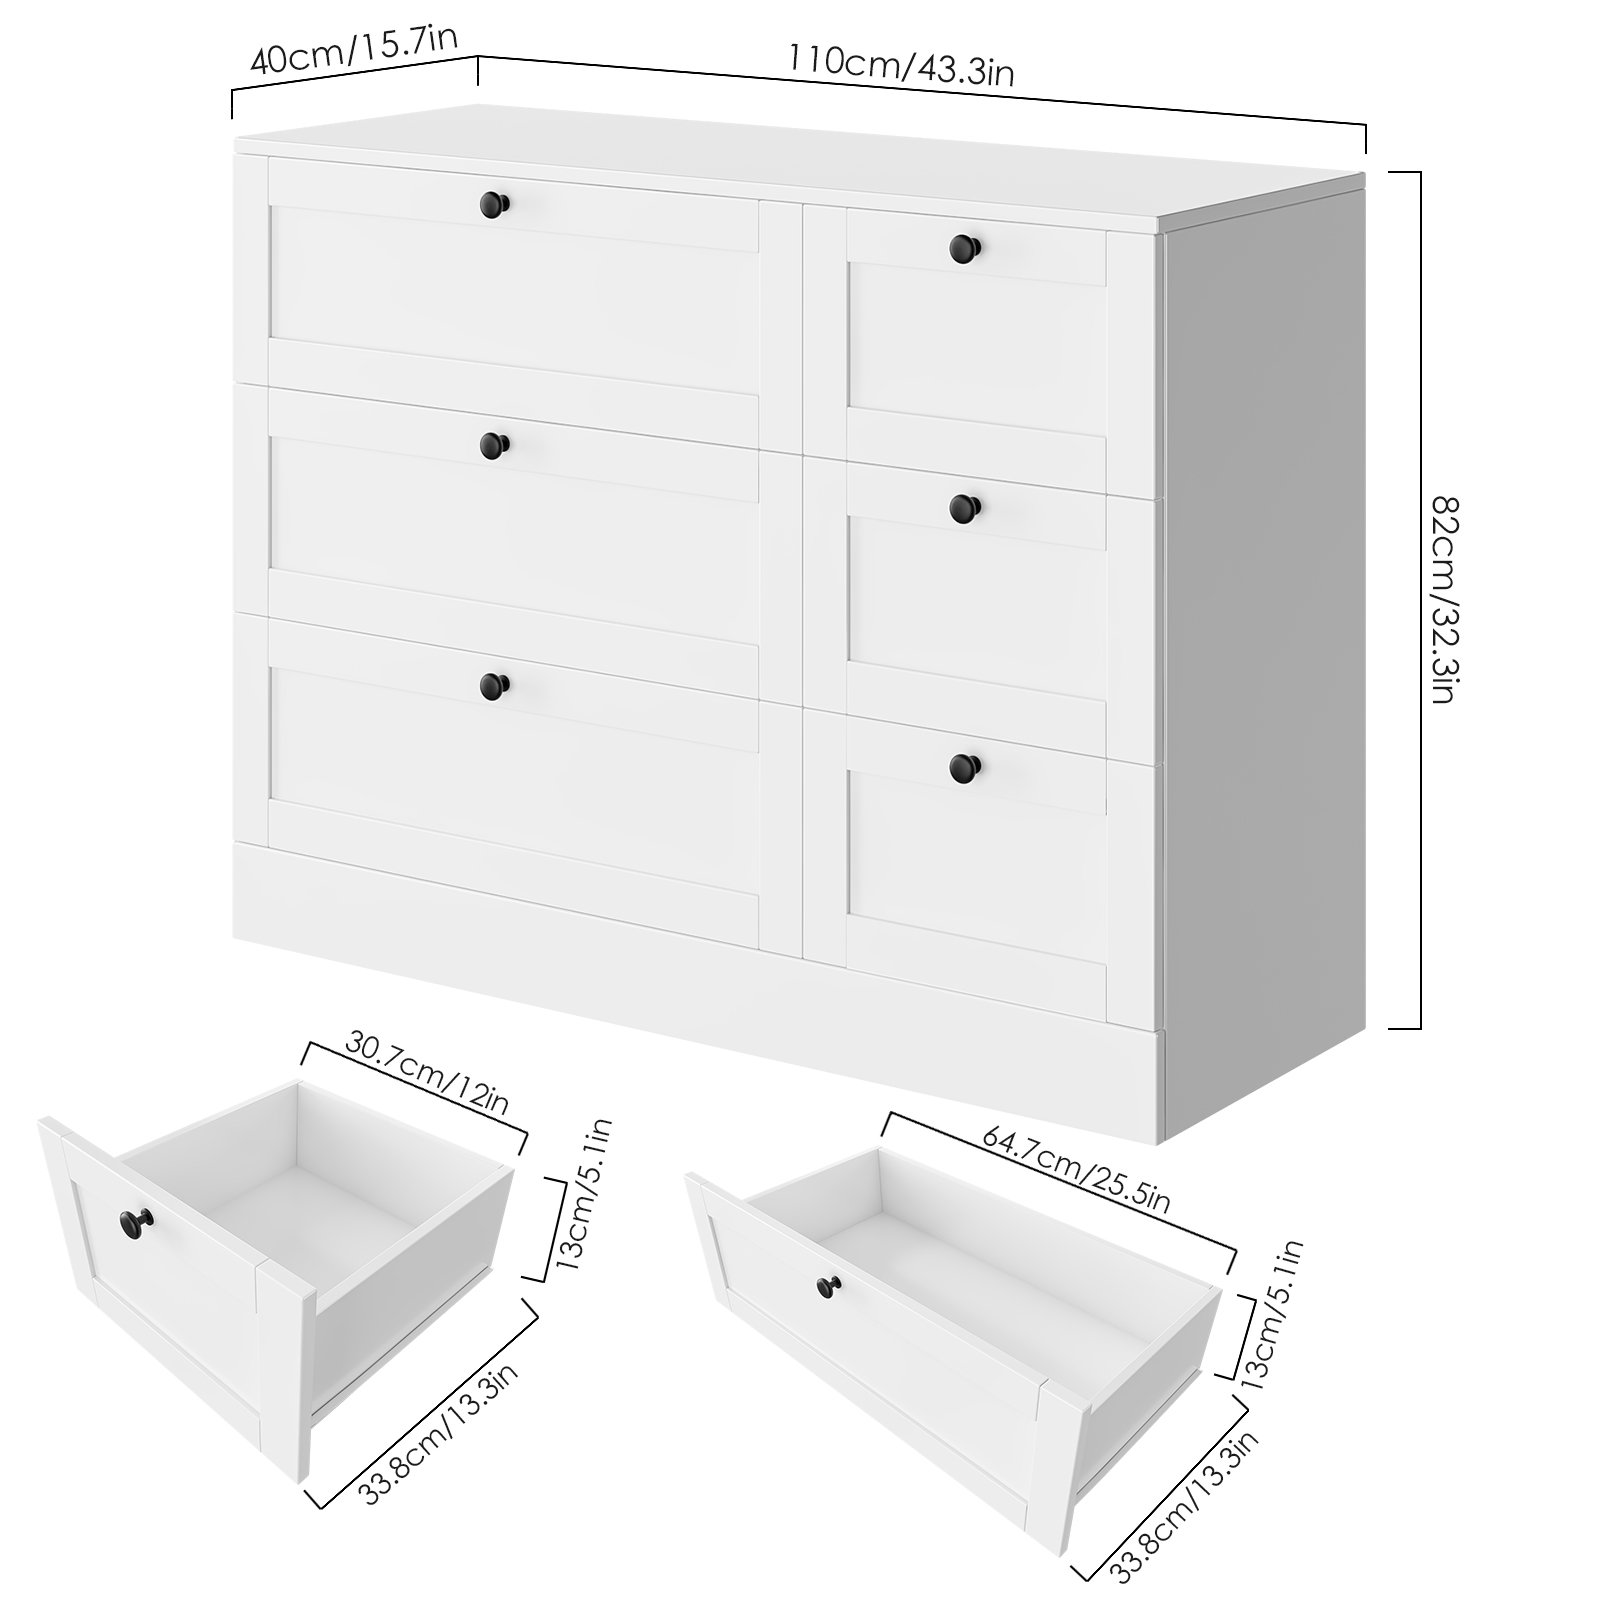 Homfa 6 Drawer White Double Dresser, Wood Storage Cabinet Chest of Drawers for Bedroom Living Room - image 2 of 7